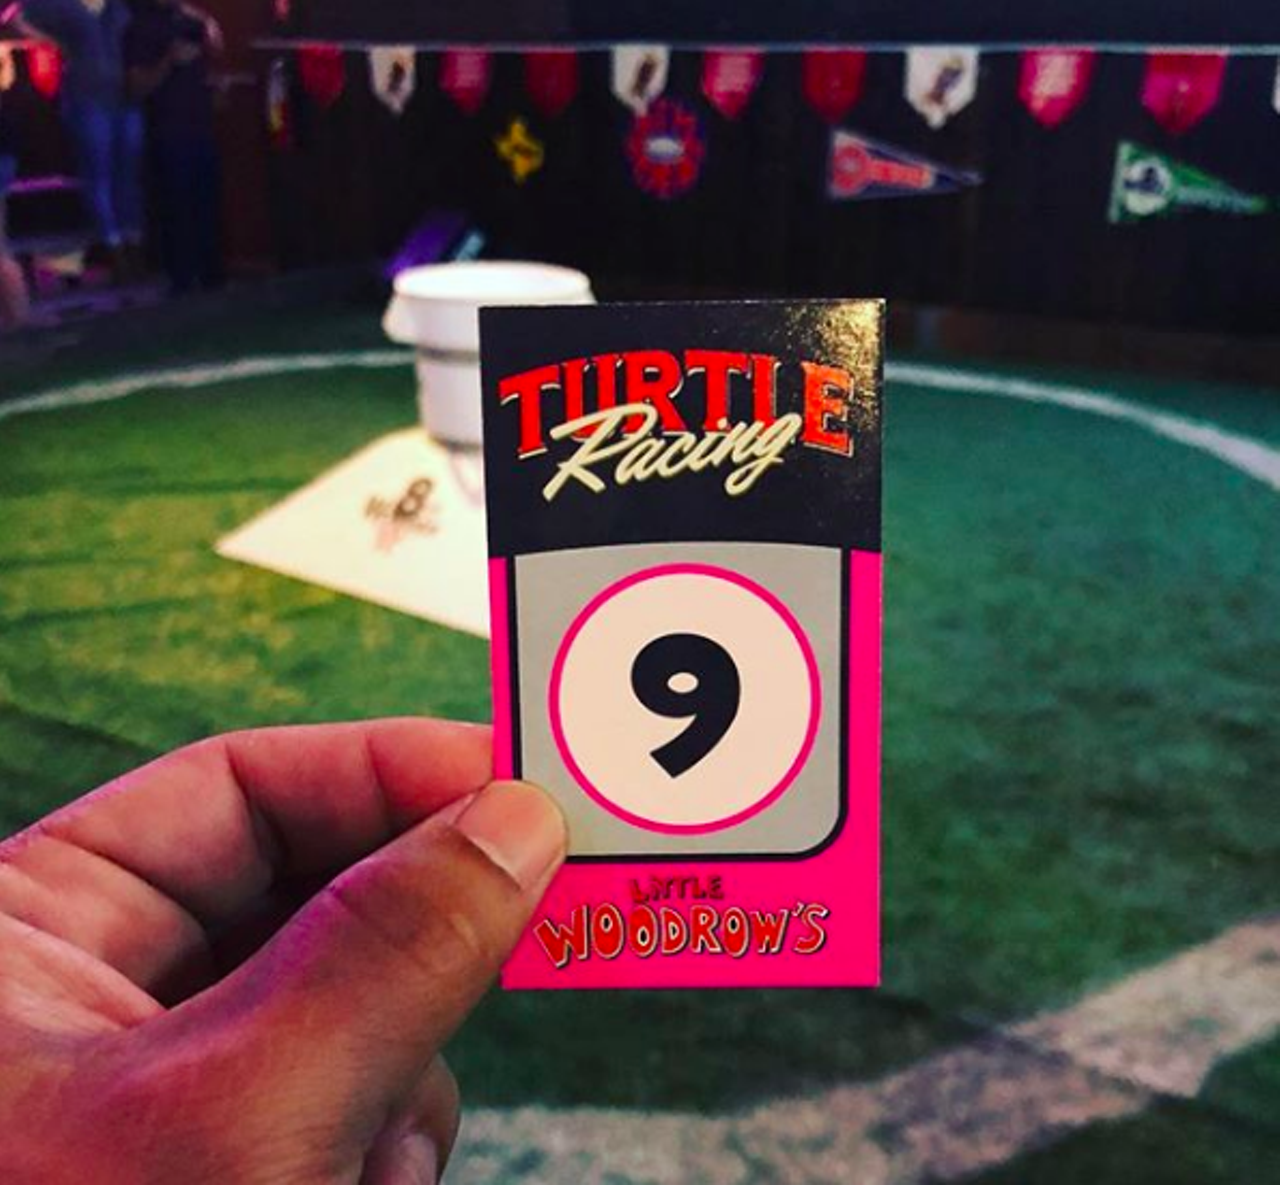 If you’re looking for a unique bar experience, look no further than Little Woodrow’s. Every Thursday the bar hosts slow-and-steady turtle races where guests can bet on which shelled-racer will reach the finish line first. Whoever bets on the winning turtle will receive a free beer and the bragging rights of a lifetime. 
Photo via Instagram / frankfromlaredo